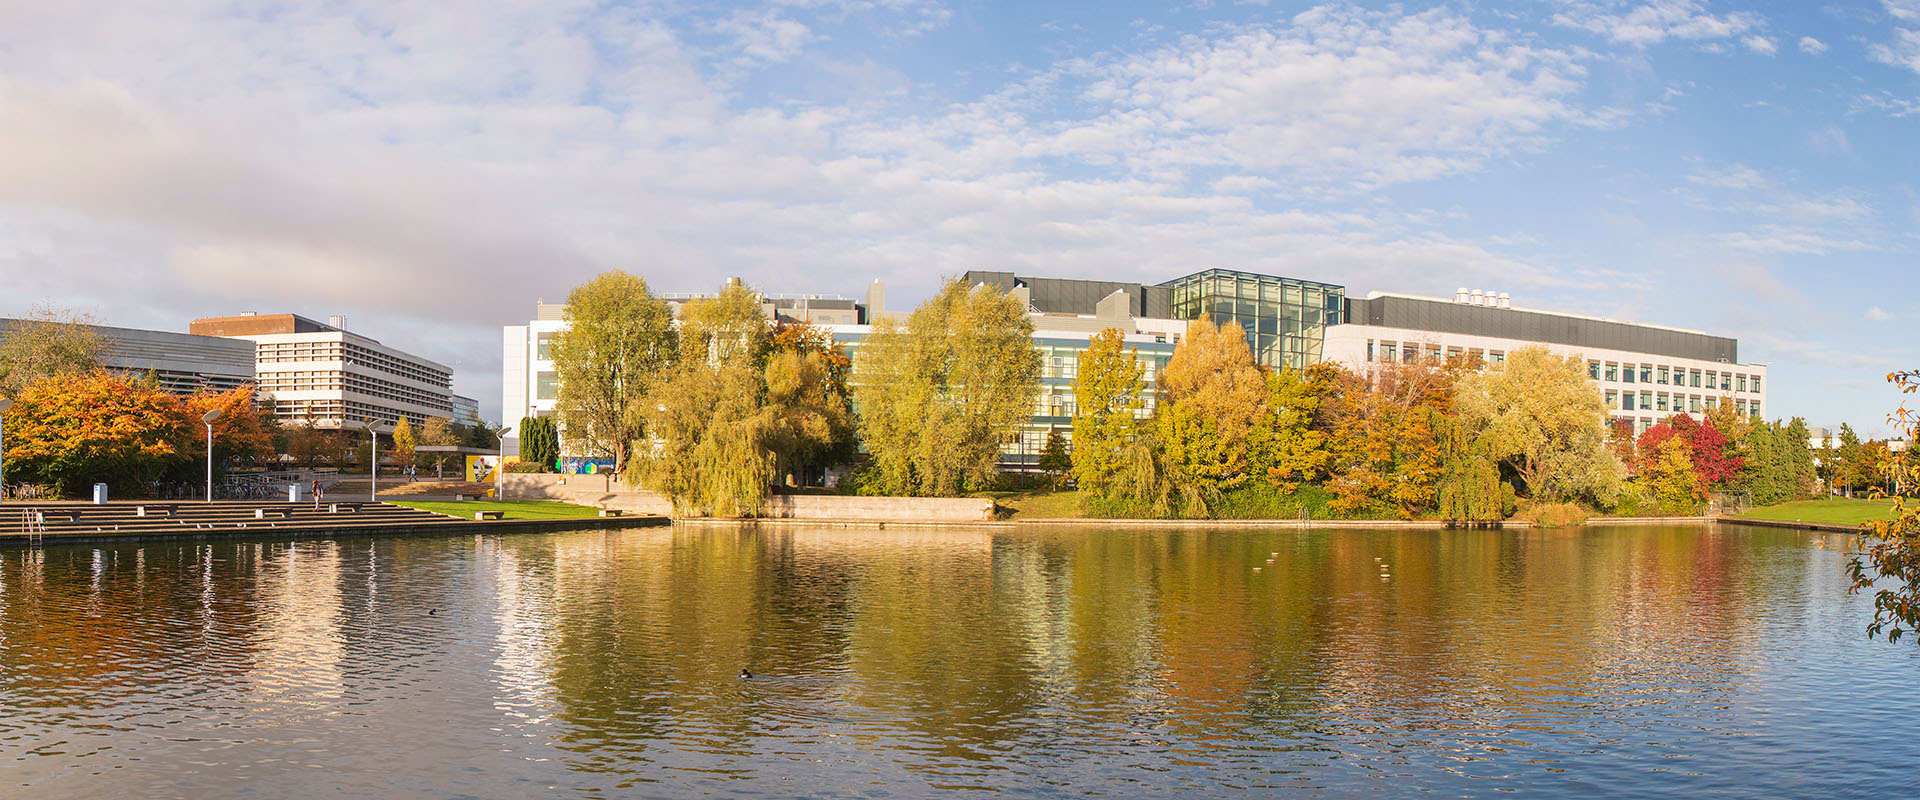 Belfield campus autumn sunshine, Science Centre with autumn foliae and the lake in the foreground